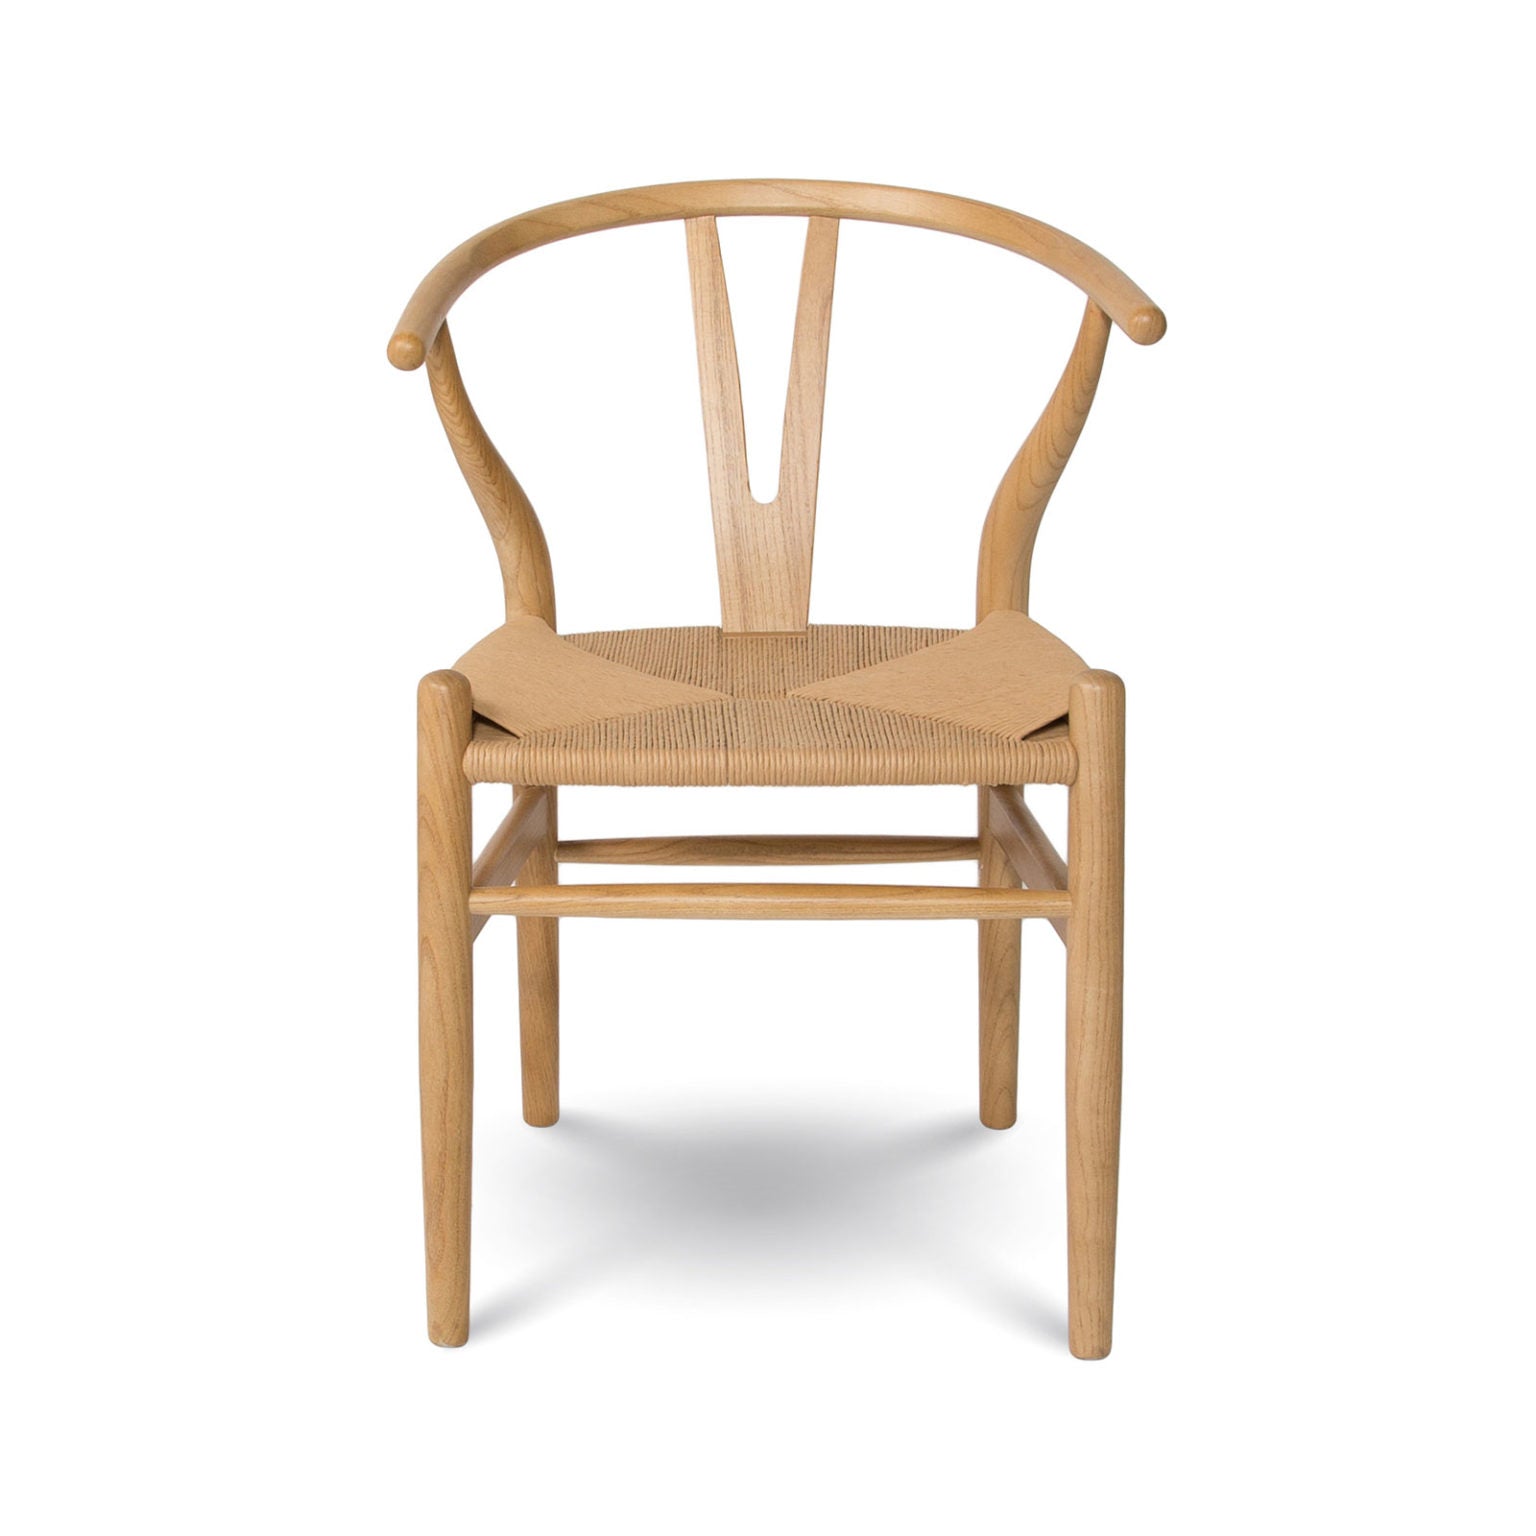 Front view of wishbone dining chair in light wood finish with natural rattan seat.